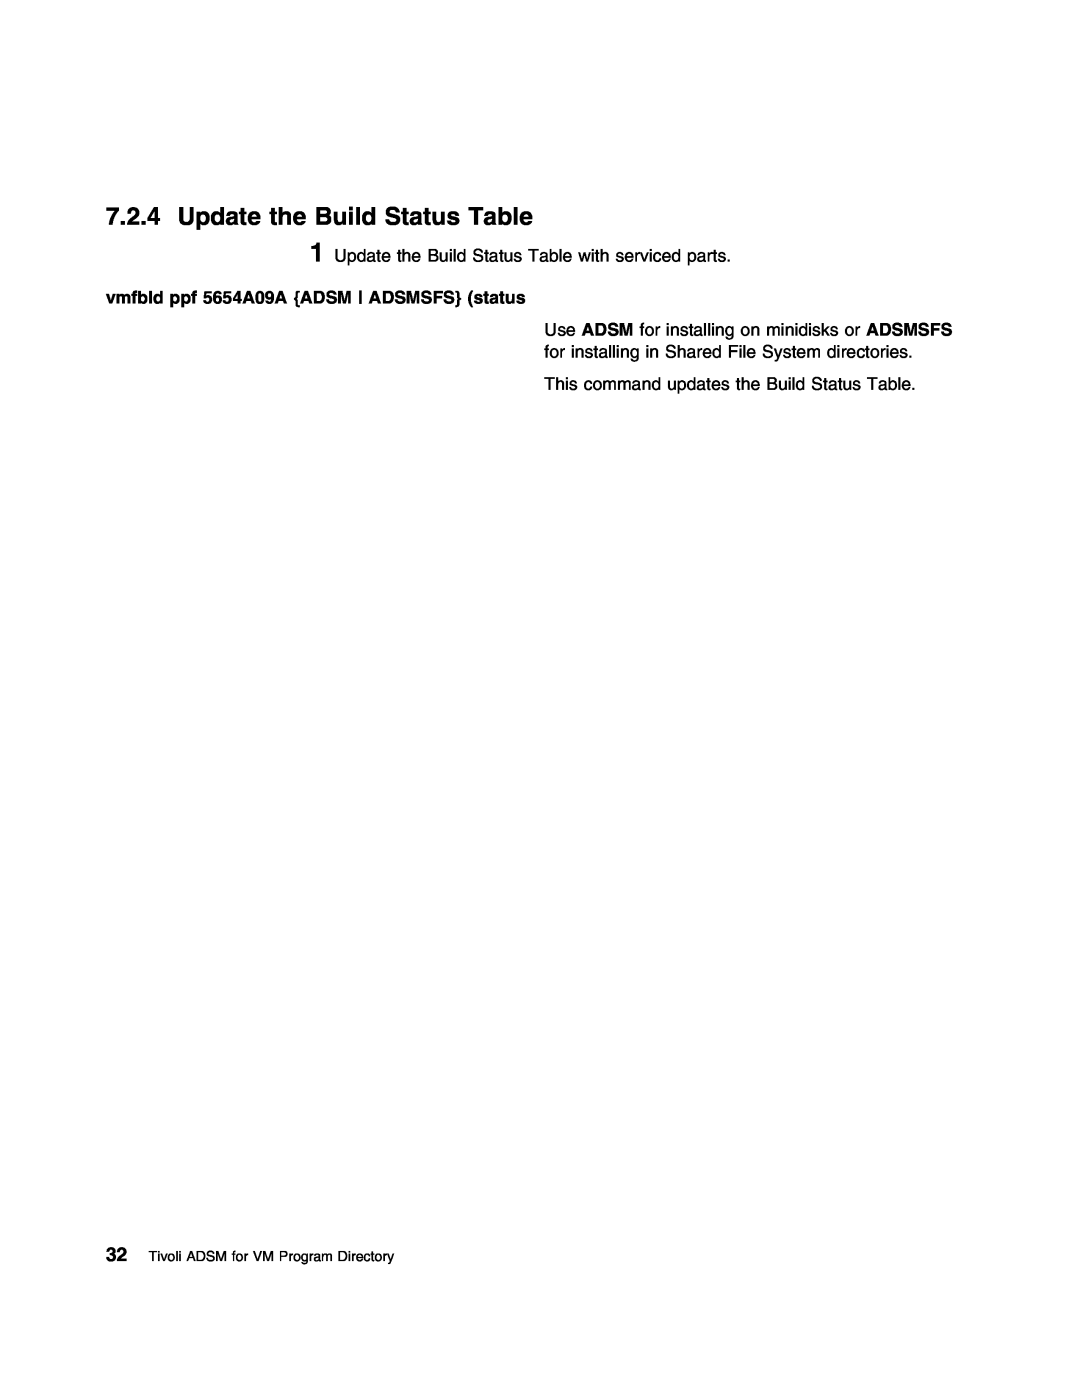 IBM 5697-VM3 manual Update the Build Status Table, vmfbld ppf 5654A09A ADSM ADSMSFS status 